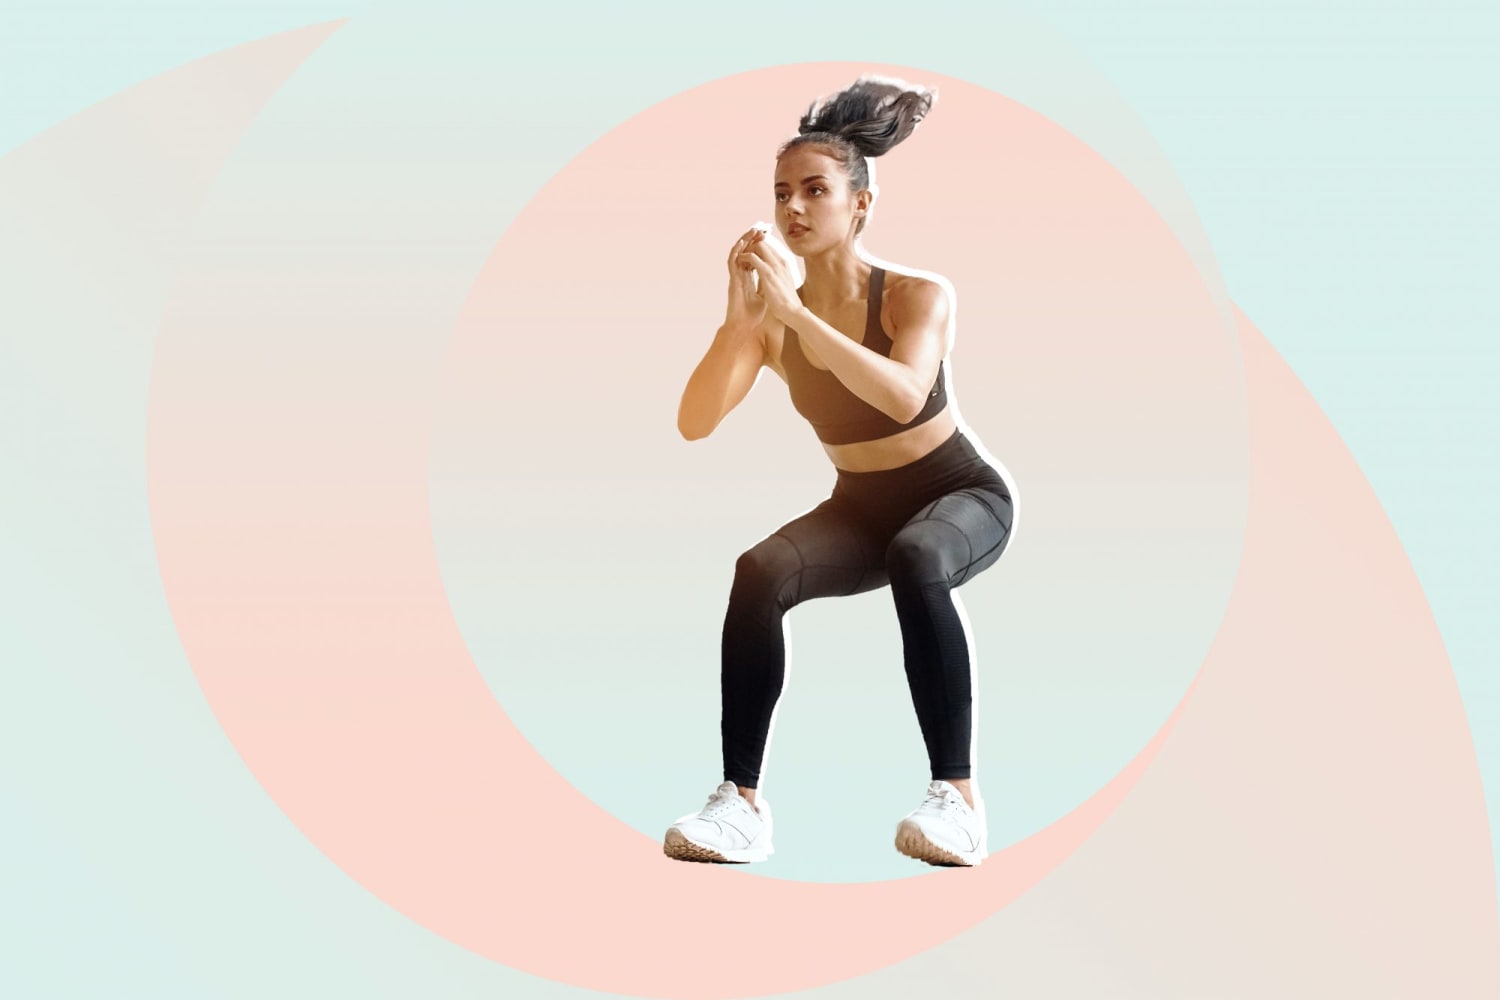 Consider This 20-Minute HIIT Workout Your Cardio for the Day